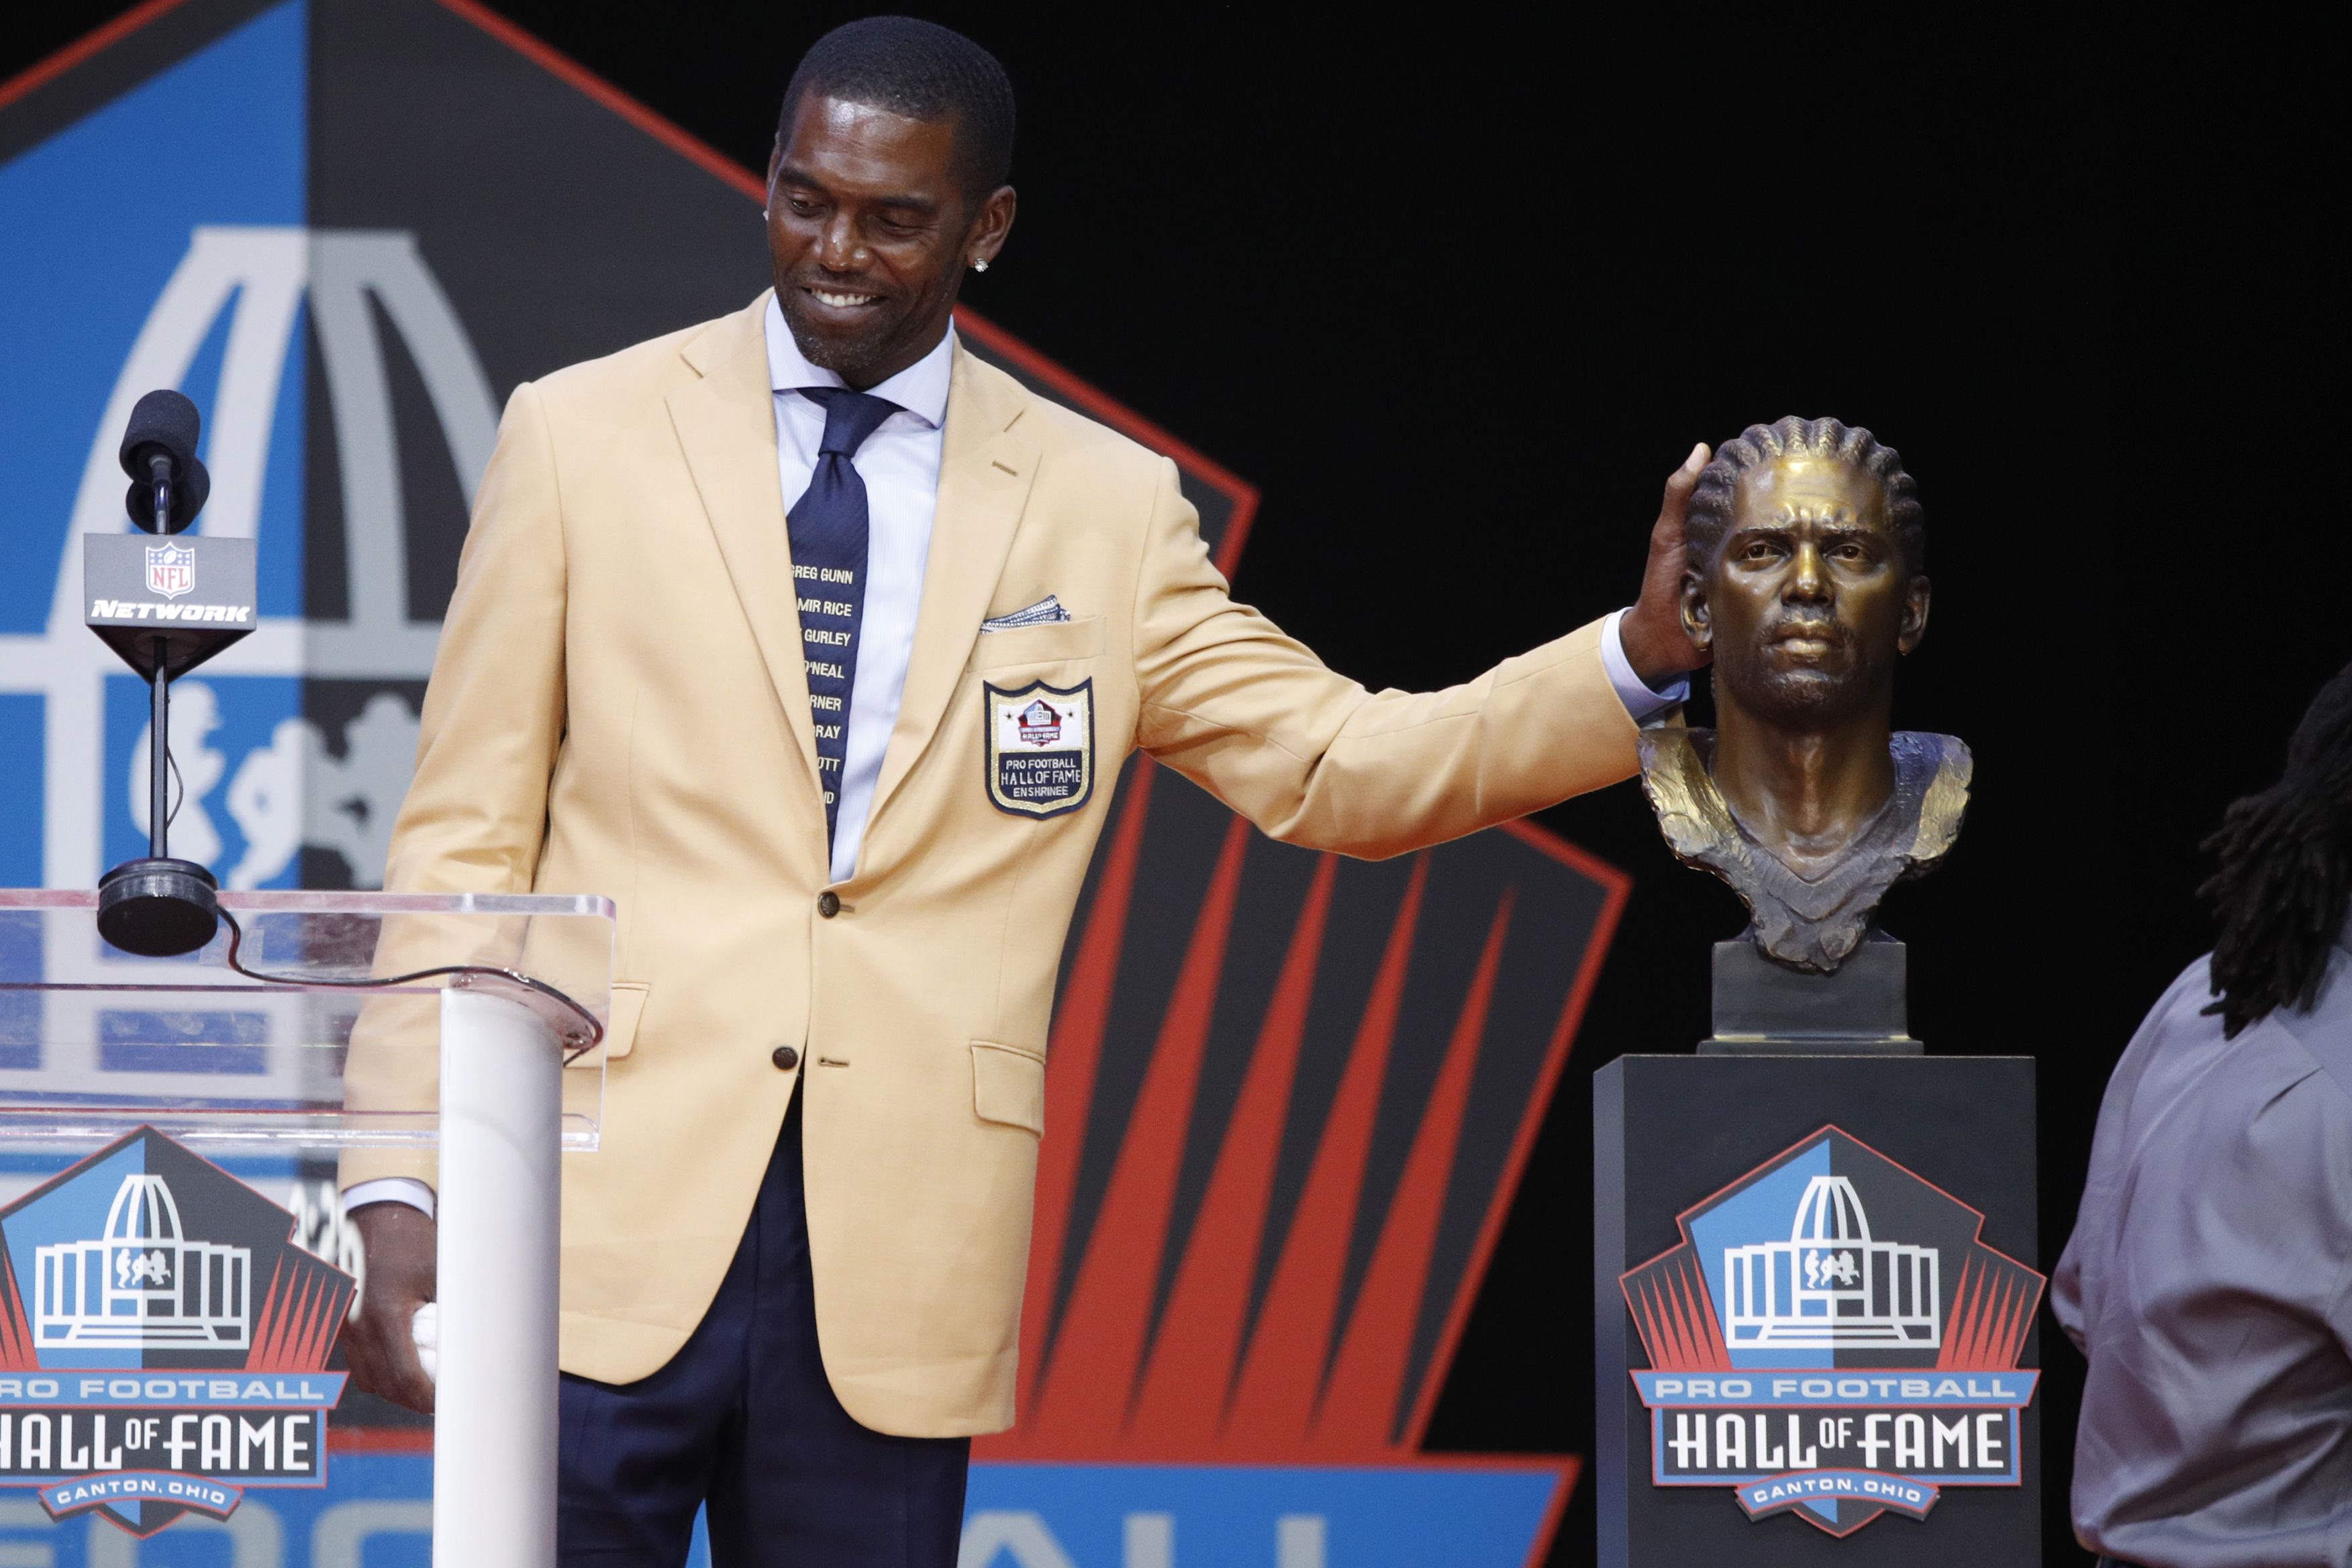 Together Again: ESPN Re-Signs Hall of Famer Randy Moss, Three-Time